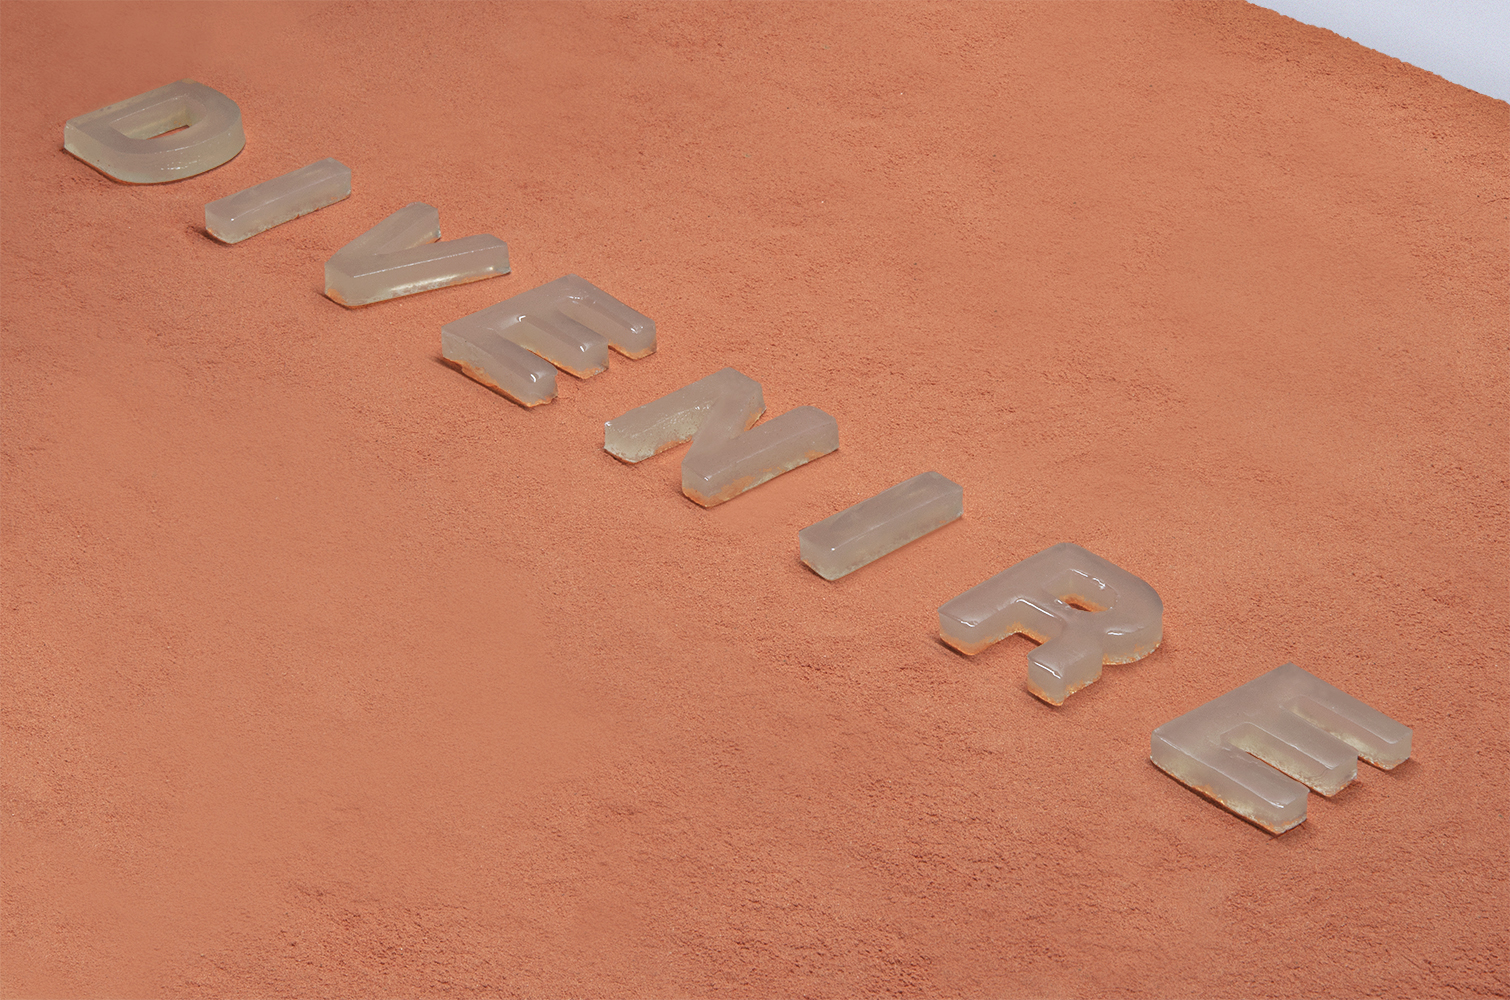 A site-specific installation with letters made with agar on top of red molding sand